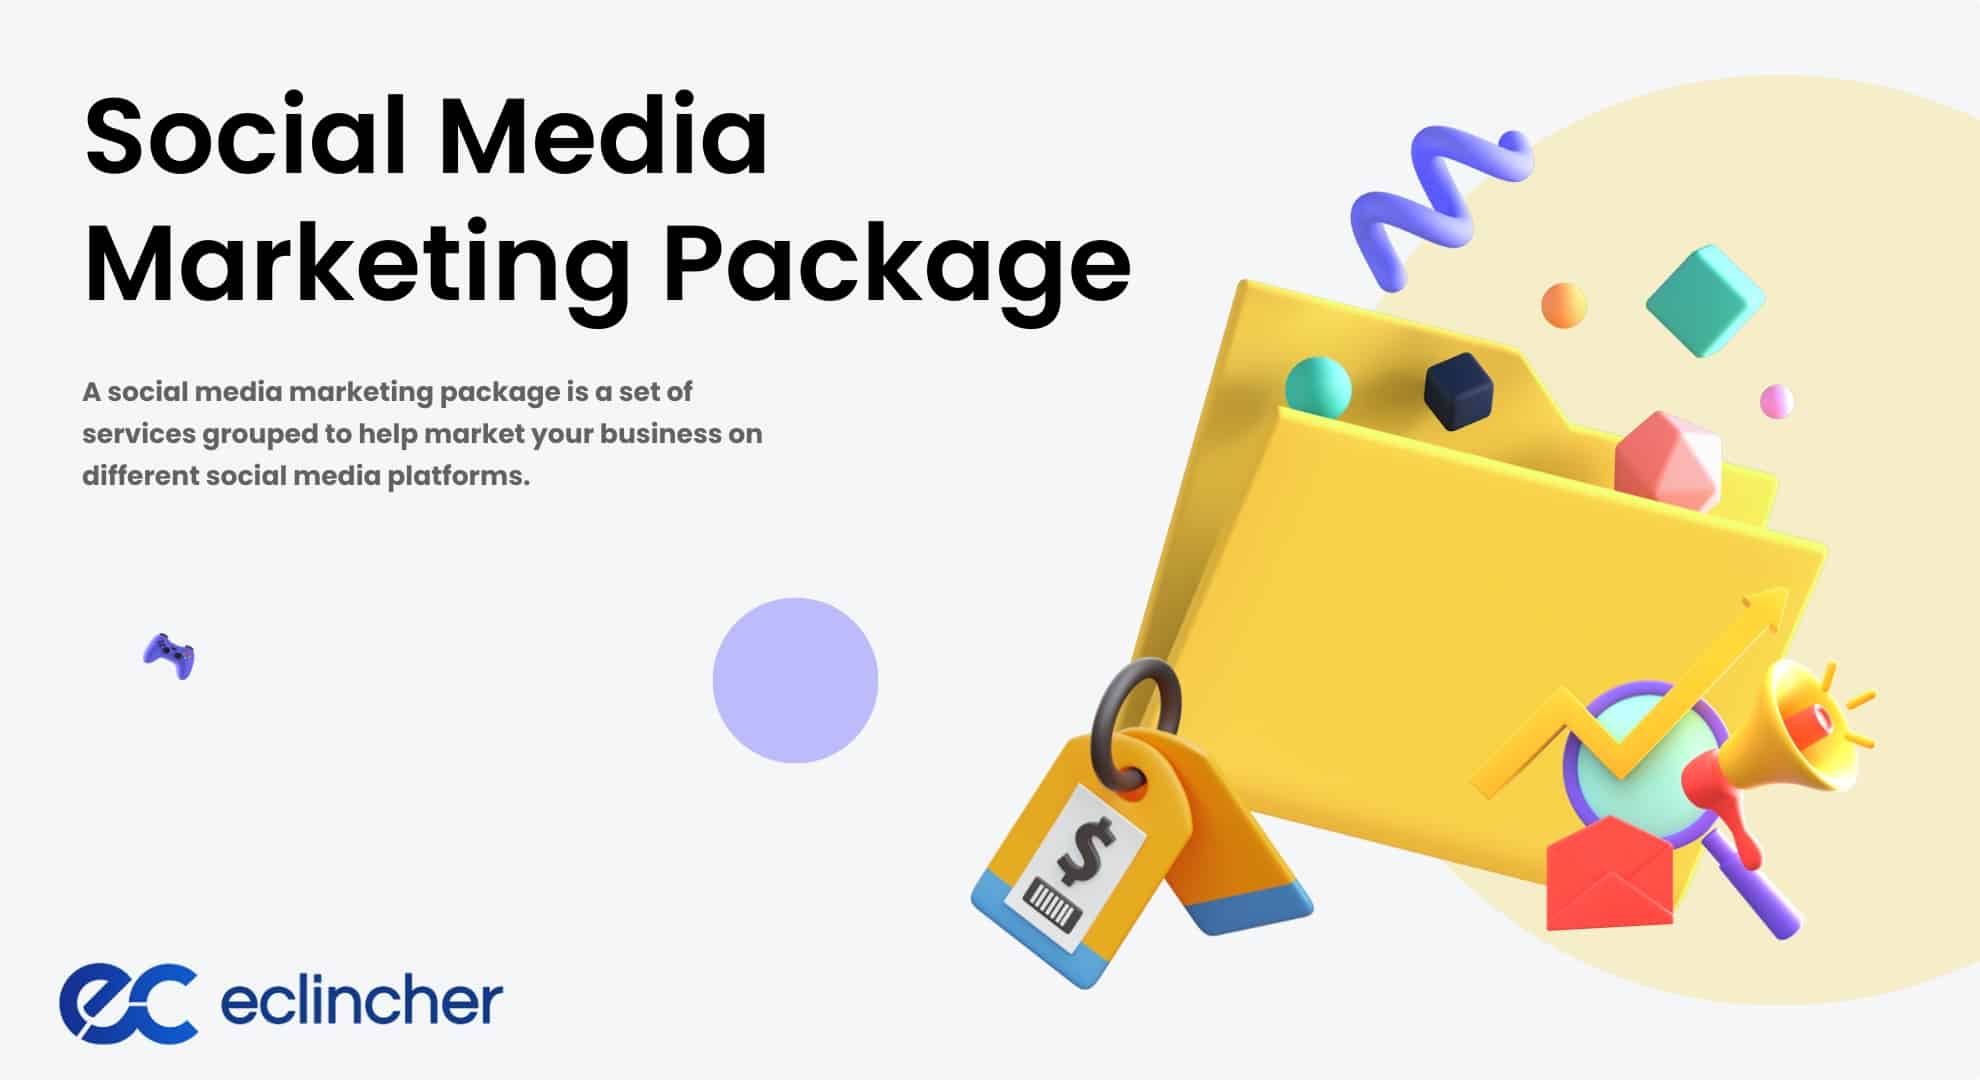 What is a Social Media Marketing Package